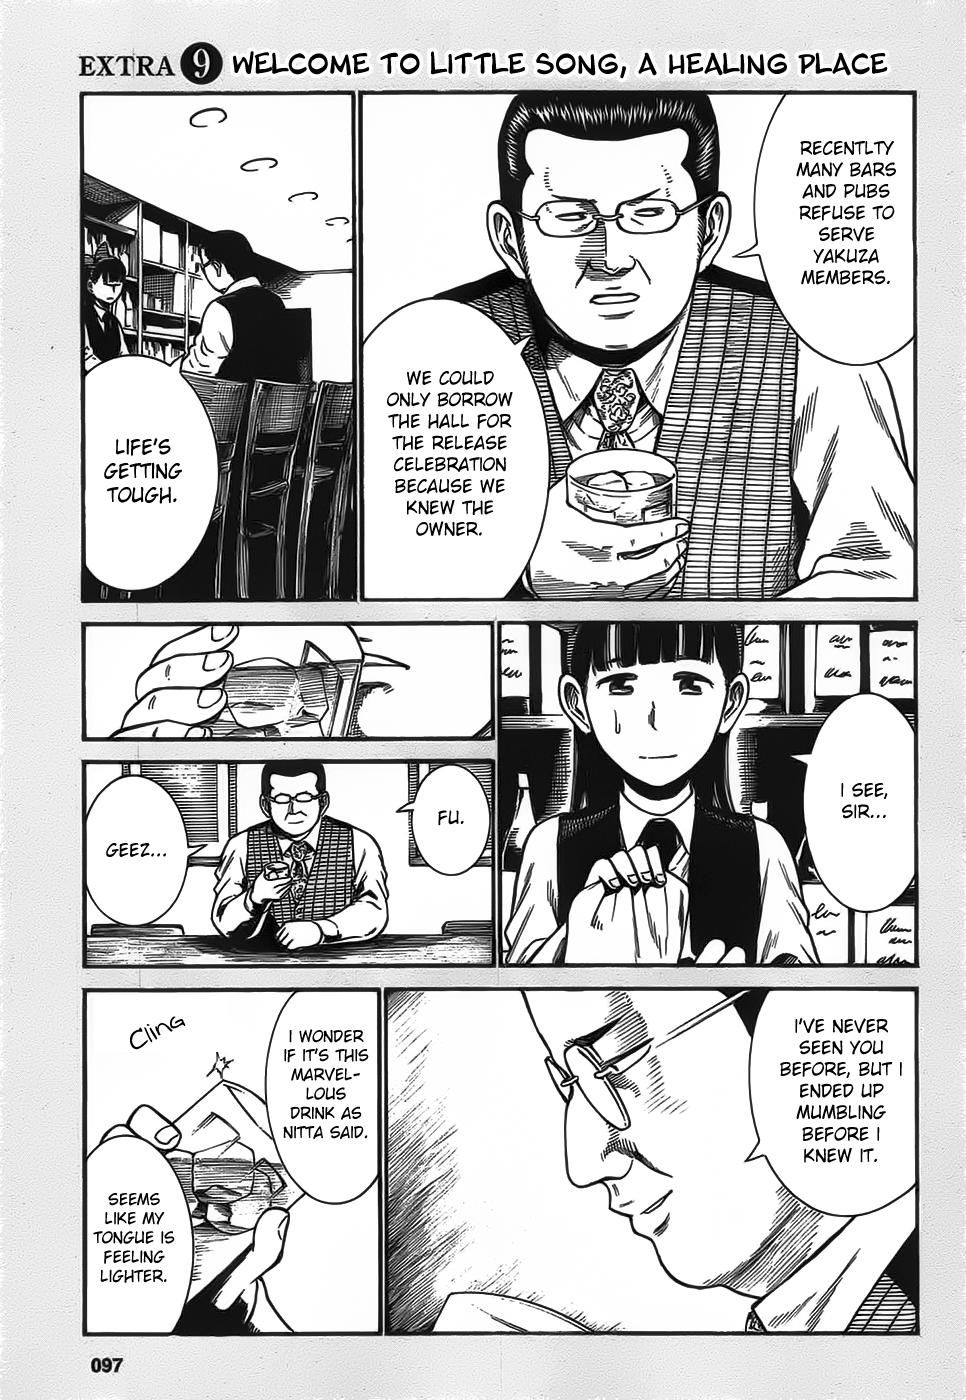 Hinamatsuri Vol.5-Chapter.24.5-Welcome-To-Little-Song,-A-Healing-Place Image